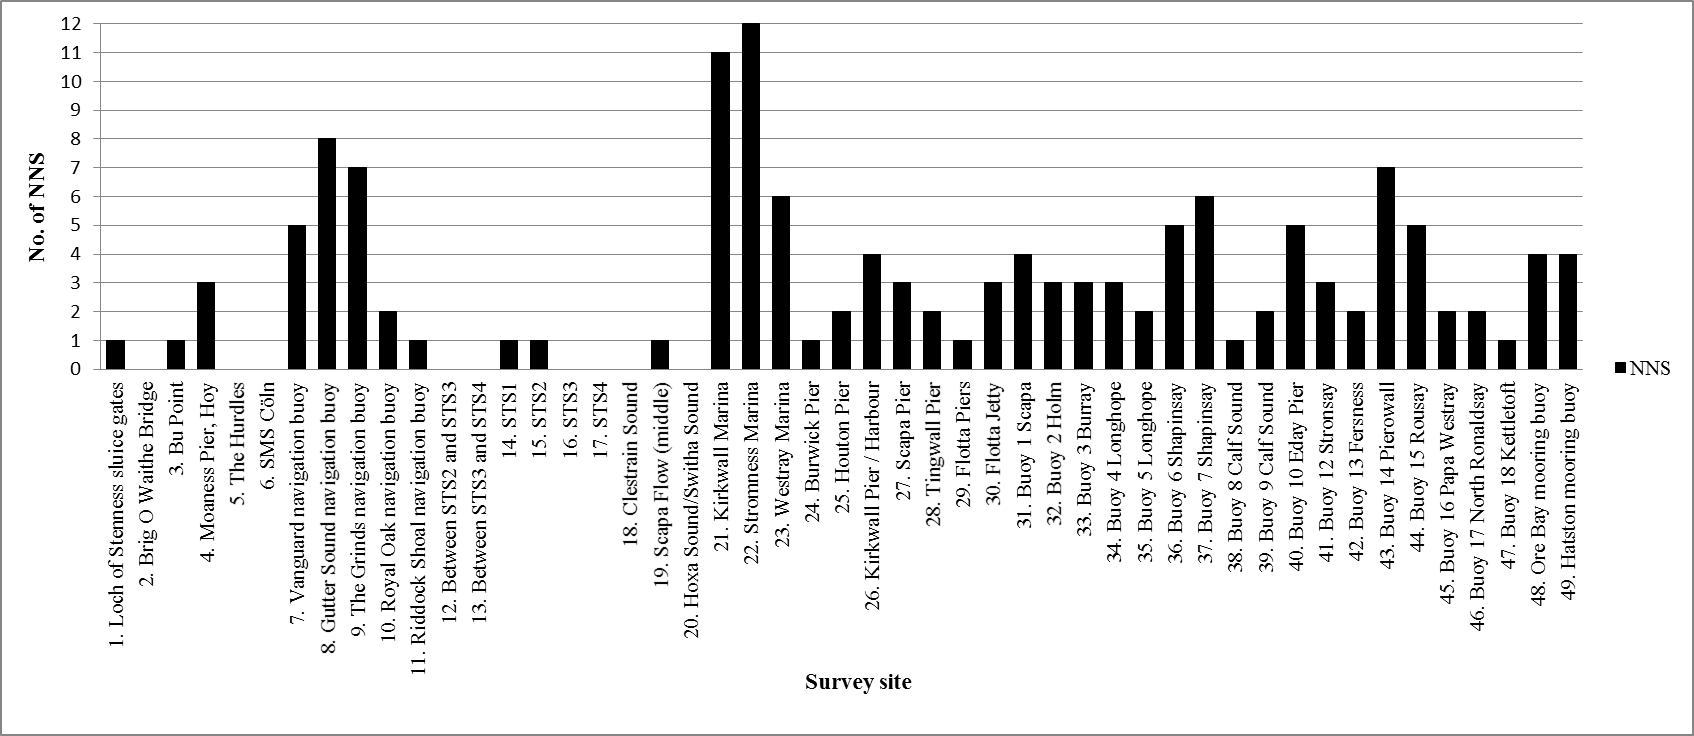 Total number of non-native species recorded at each survey site (2012 – 2017)